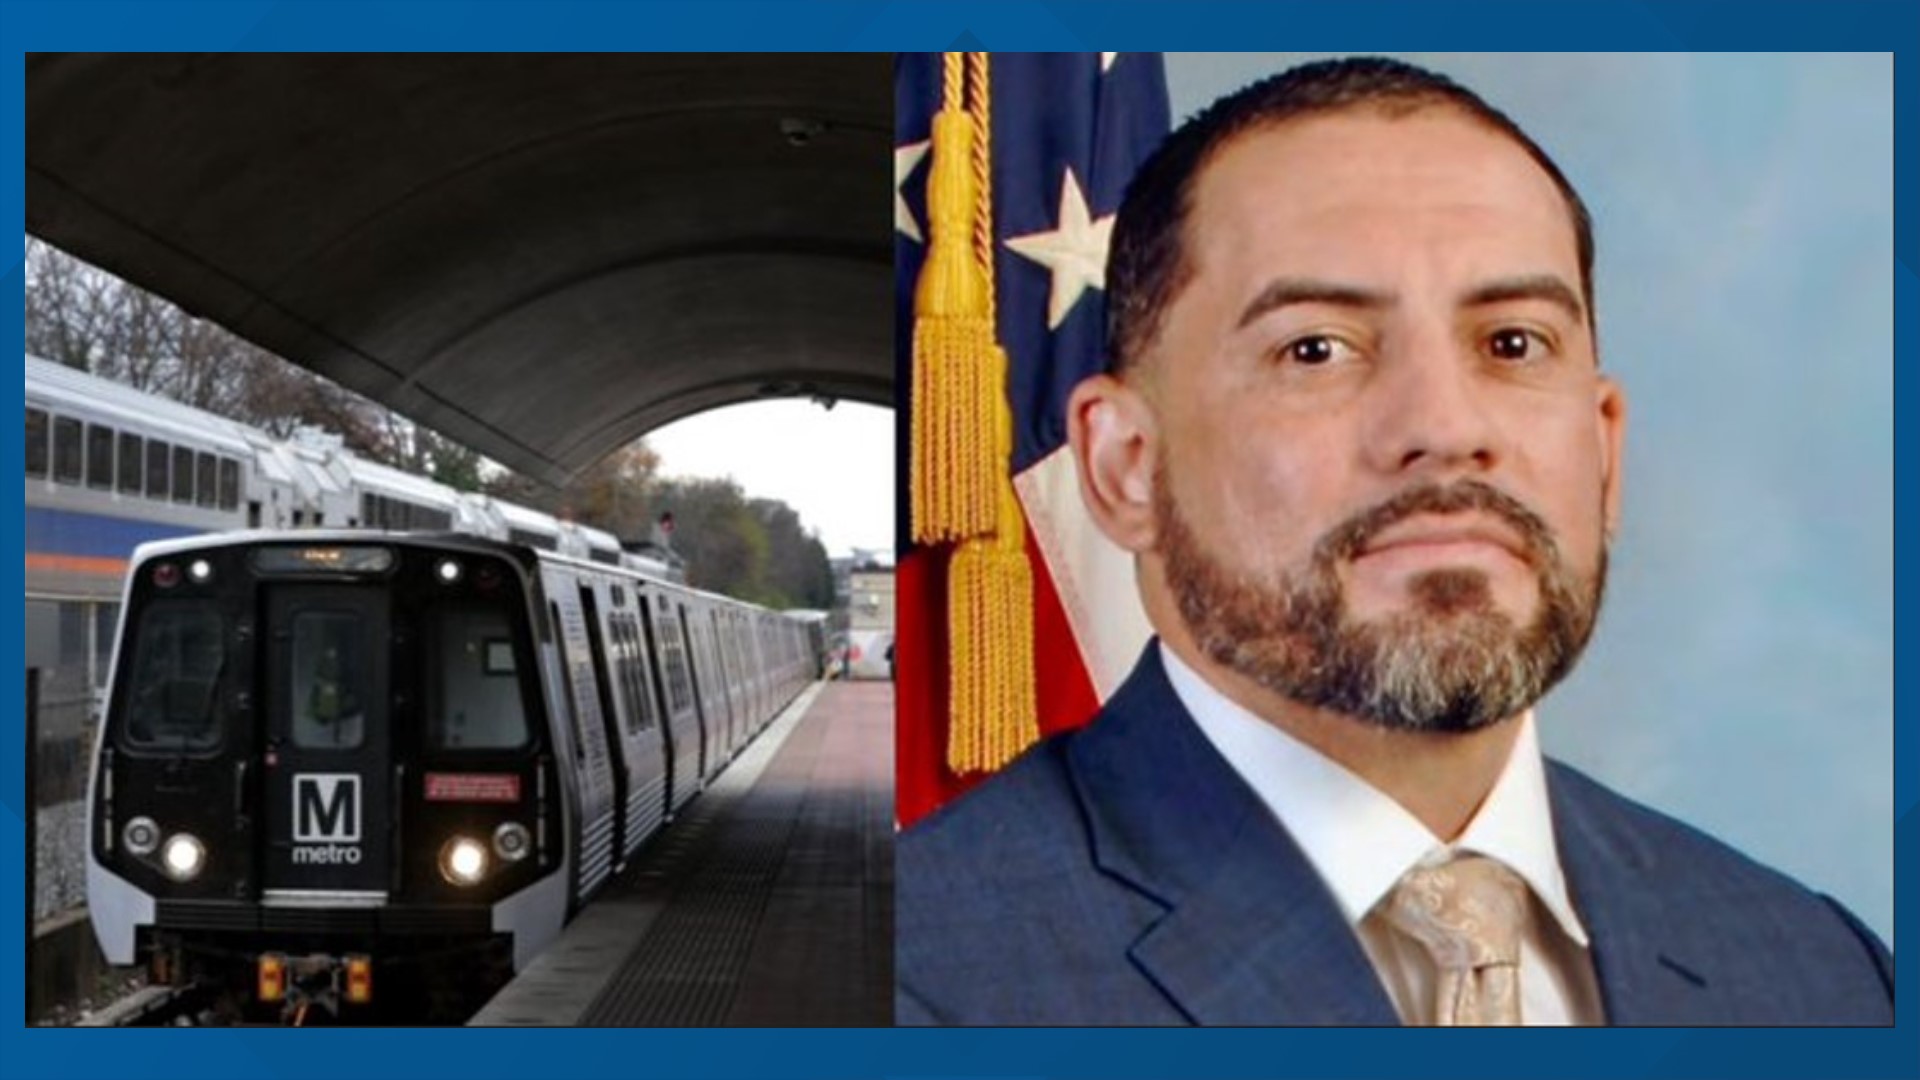 A jury has found an FBI agent not guilty on all counts for his involvement in a shooting in December 2020 on a Metro train that left a man wounded.